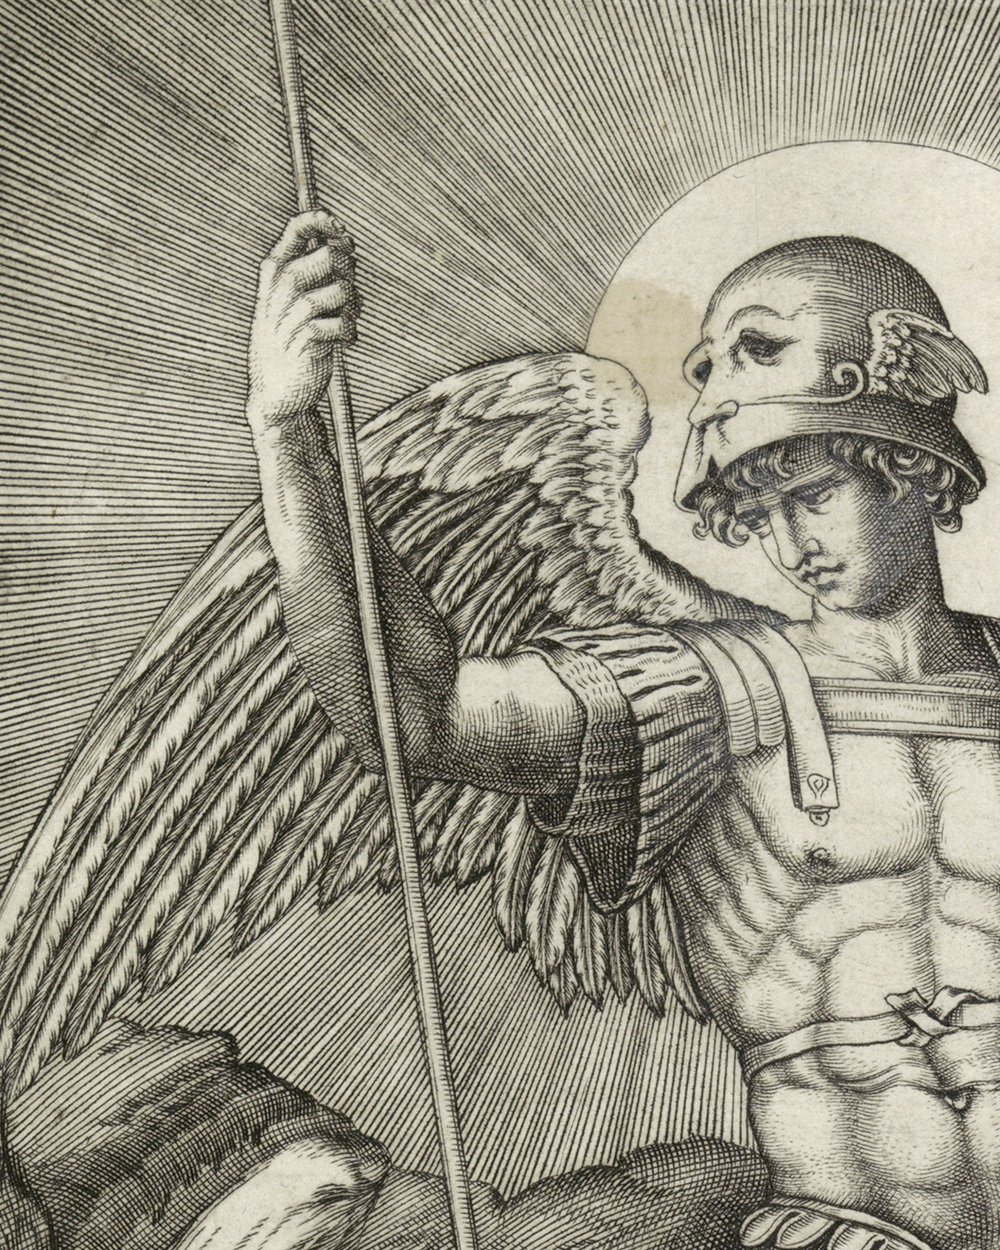 ''Archangel Miguel and the Dragon'' (1500 - 1536)